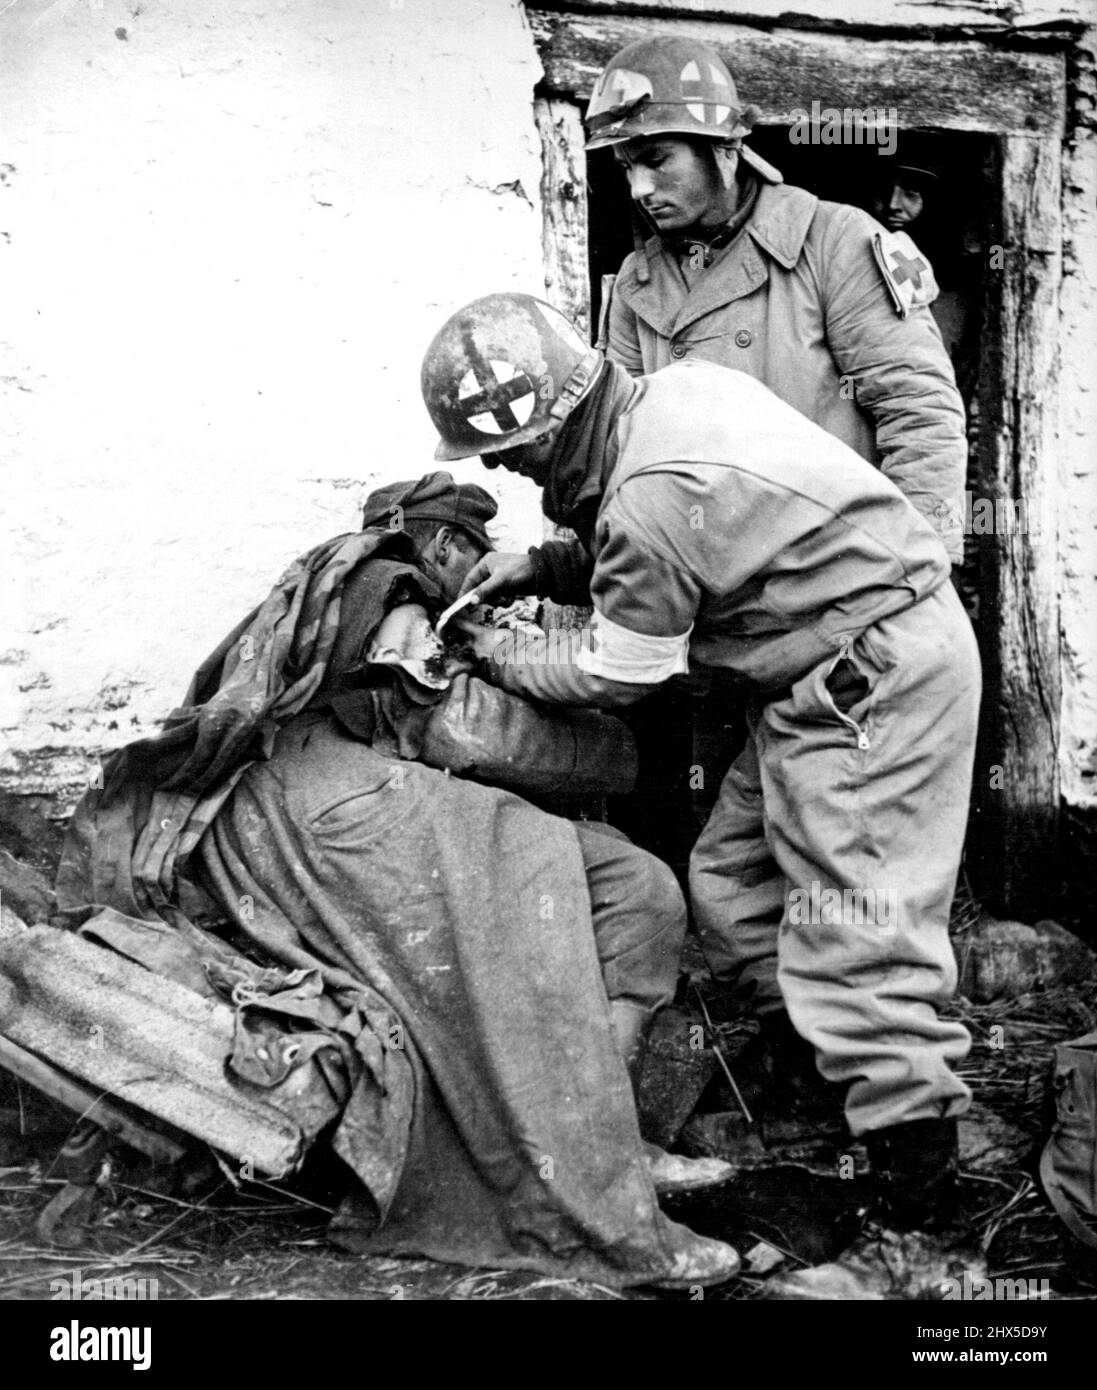 Yanks Treat Wounded German Paratrooper American Medical corpsmen treat a German Paratrooper's shoulder wound during the Yank drive to relieve U.S. Troops trapped in Bastogne by the German December breakthrough into Belgium and Luxembourg. January 6, 1945. (Photo by Associated Press Photo). Stock Photo